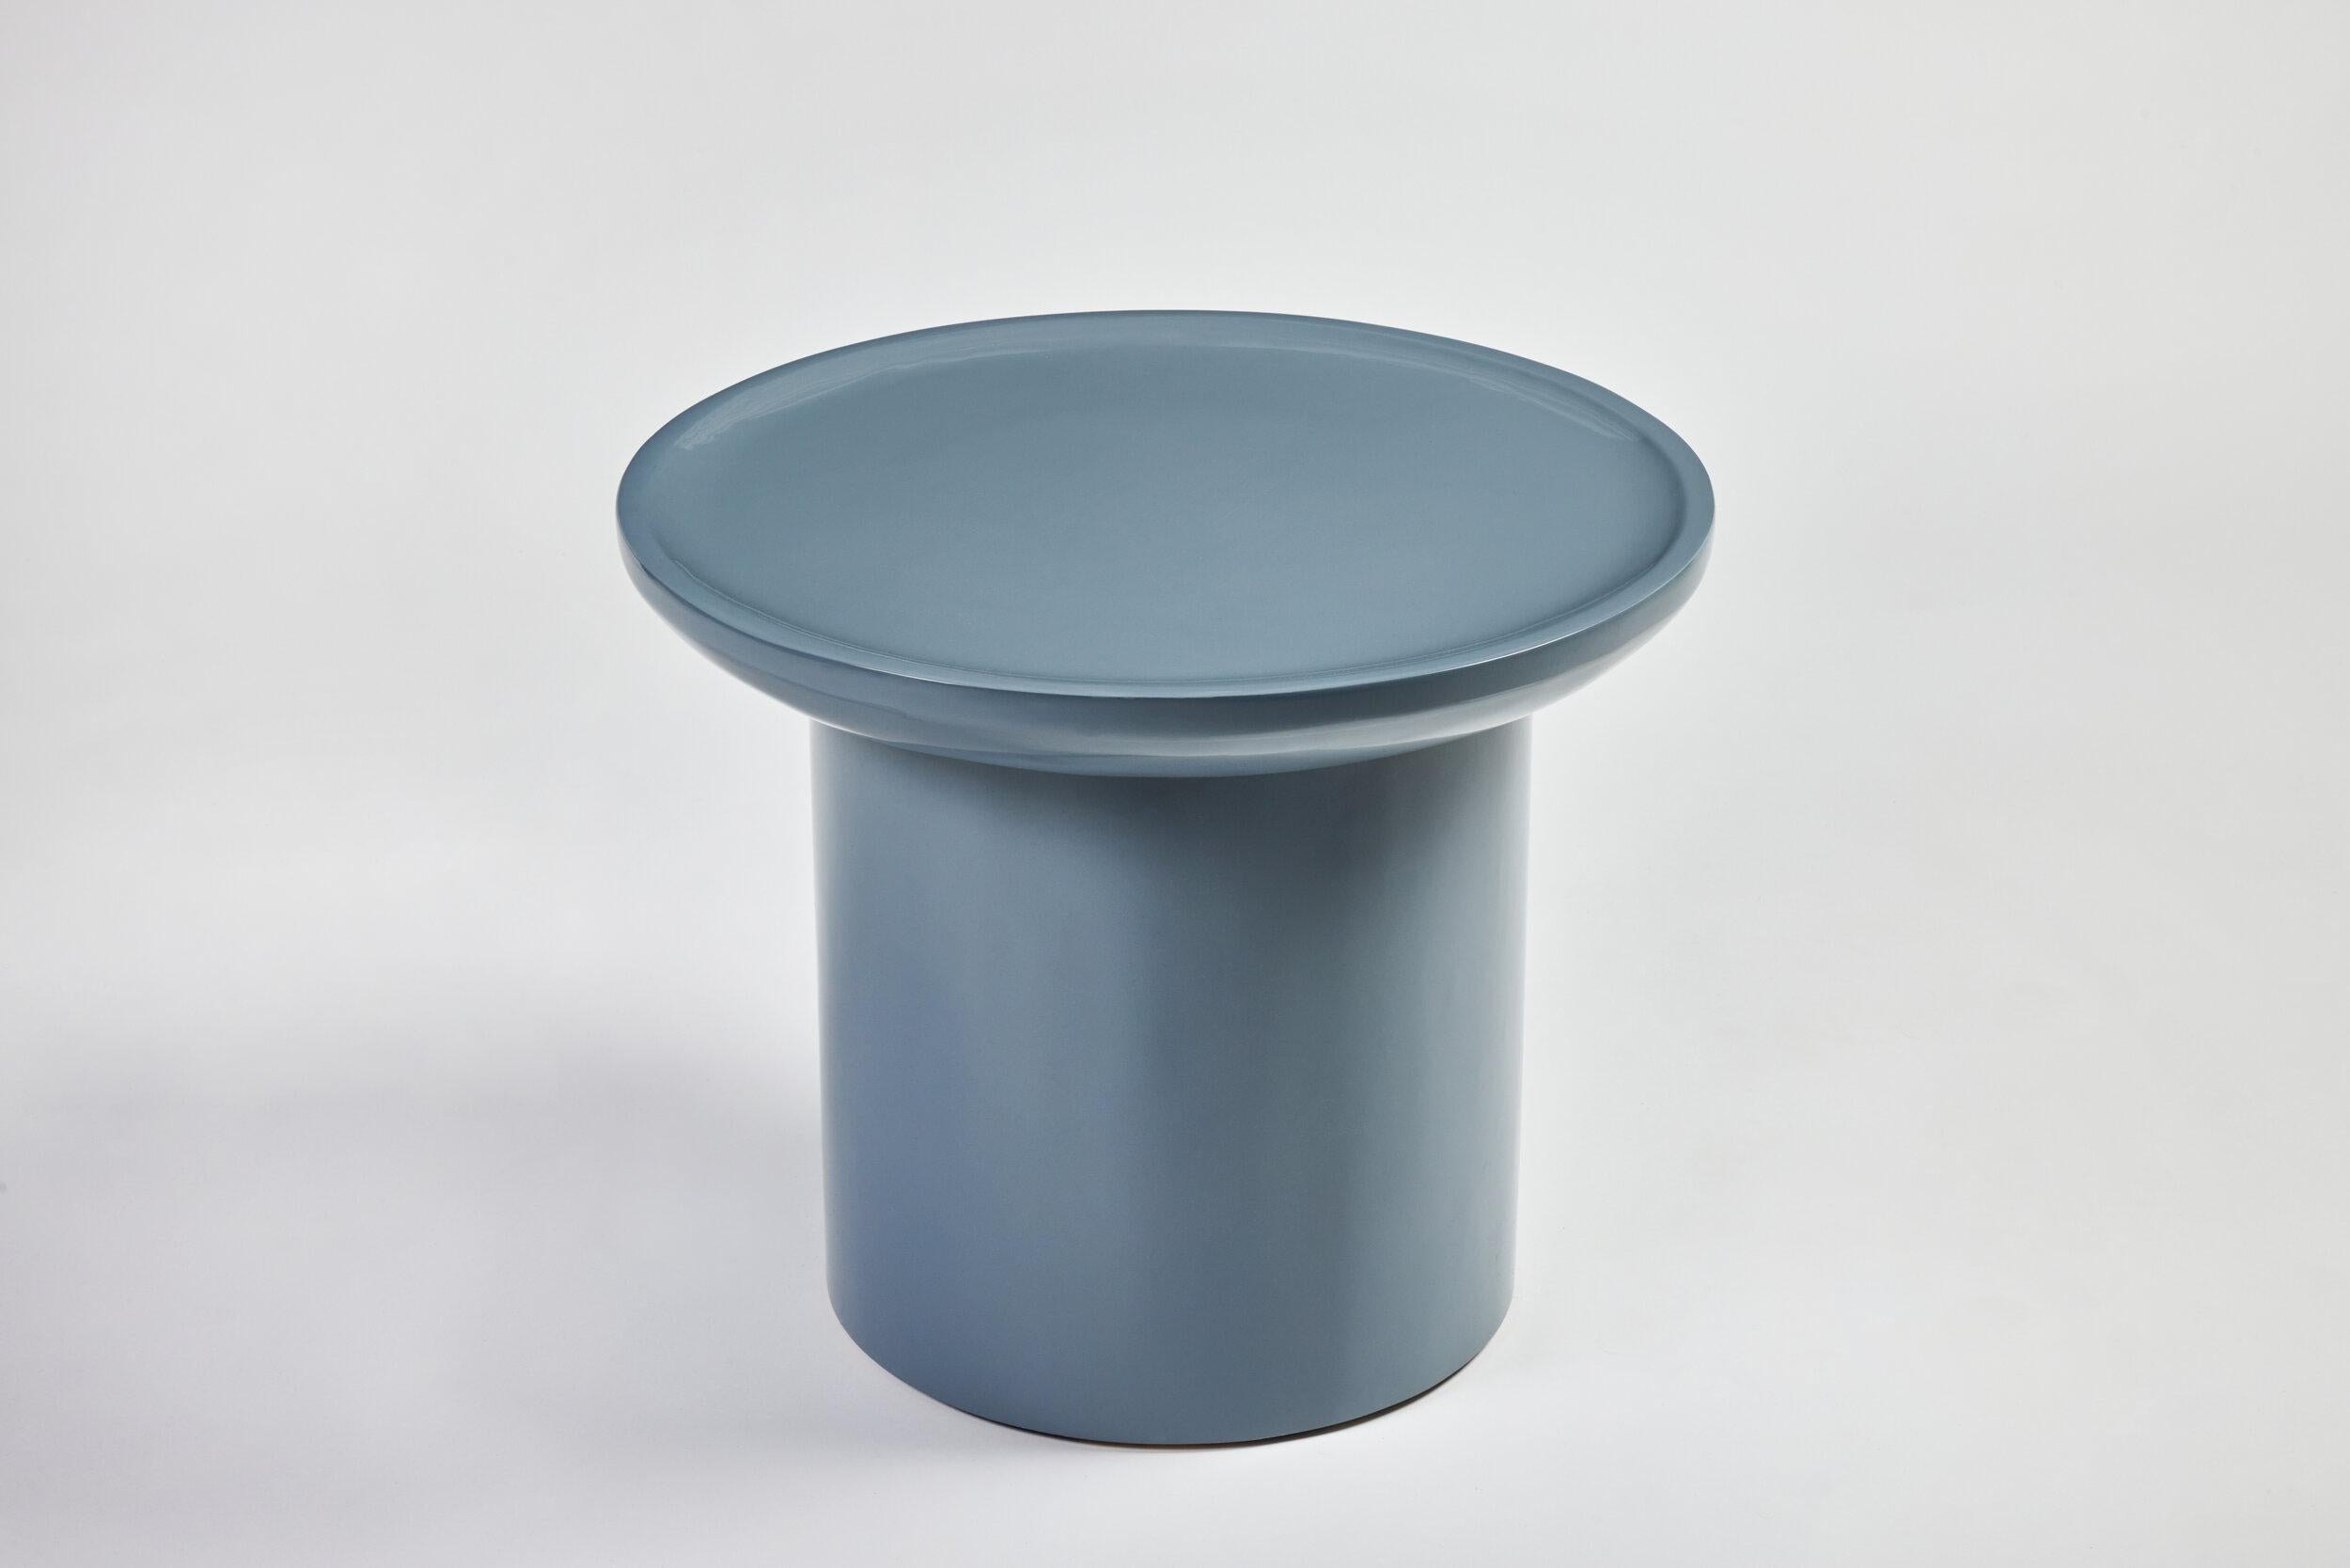 Martin & Brockett's Findley Round Low Side Table features the collection's signature curved lip and round base. Shown in Glacier blue hand polished high gloss lacquer 

H 19.75 in. x W 24 in.

Part of our Findley Collection.

Lead time: 15-16 weeks